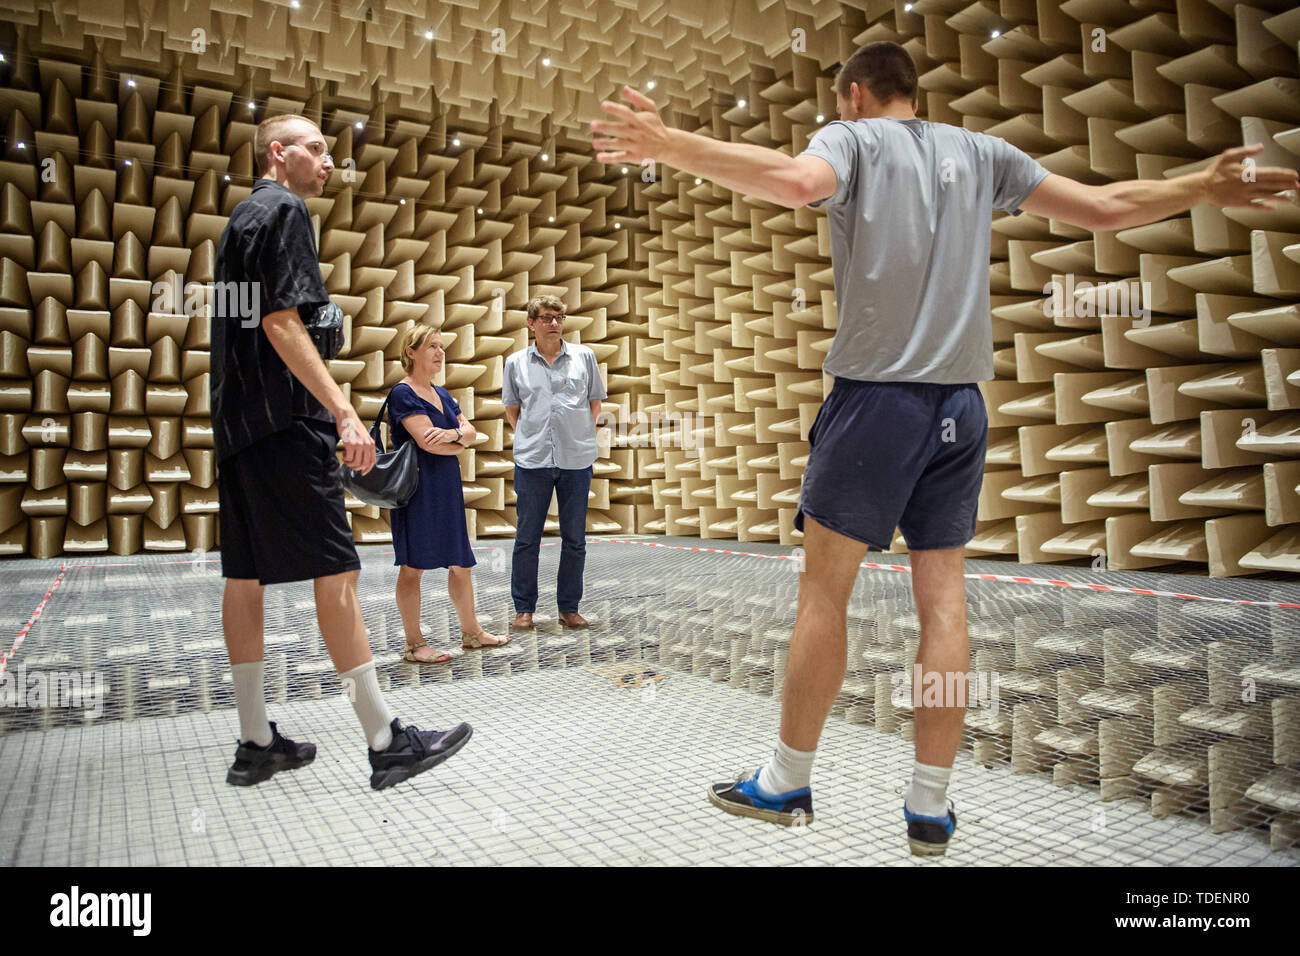 Berlin, Germany. 15th June, 2019. During the Long Night of the Museums at the Technical University of Berlin, visitors stand in an anechoic room. Walls, ceiling and floor are manufactured in such a way that they absorb as much sound as possible and the room appears acoustically 'dead'. Credit: Gregor Fischer/dpa/Alamy Live News Stock Photo